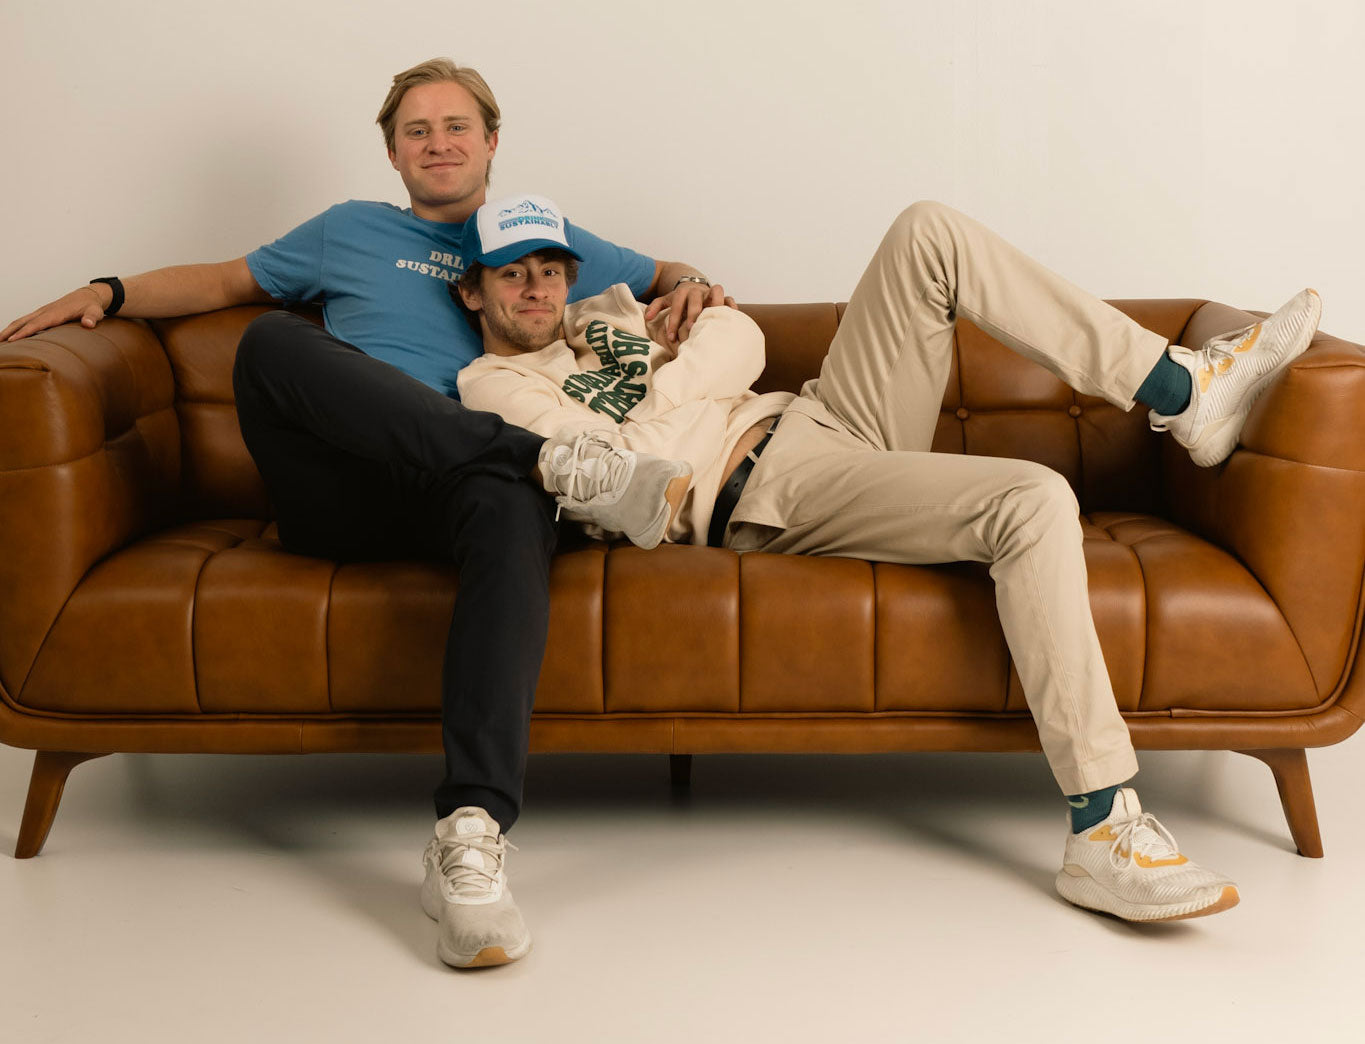 Earth Brands Founders on Couch